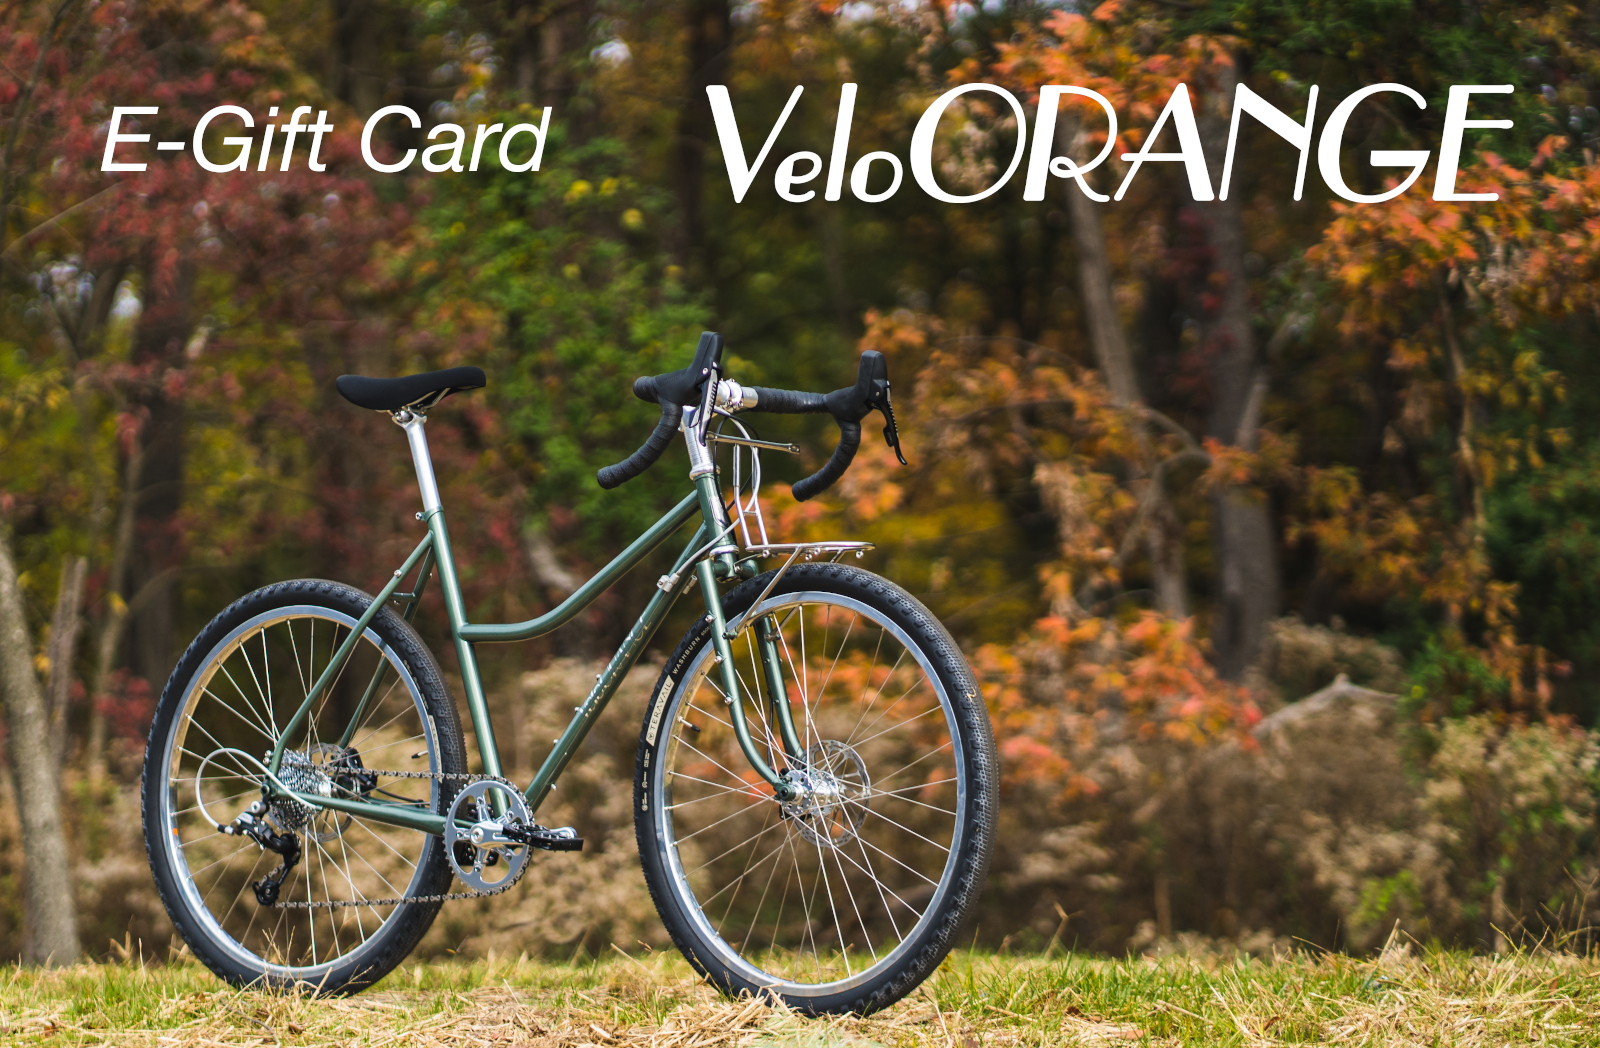 Velo Orange is offering 20% off Gift Cards Through Monday